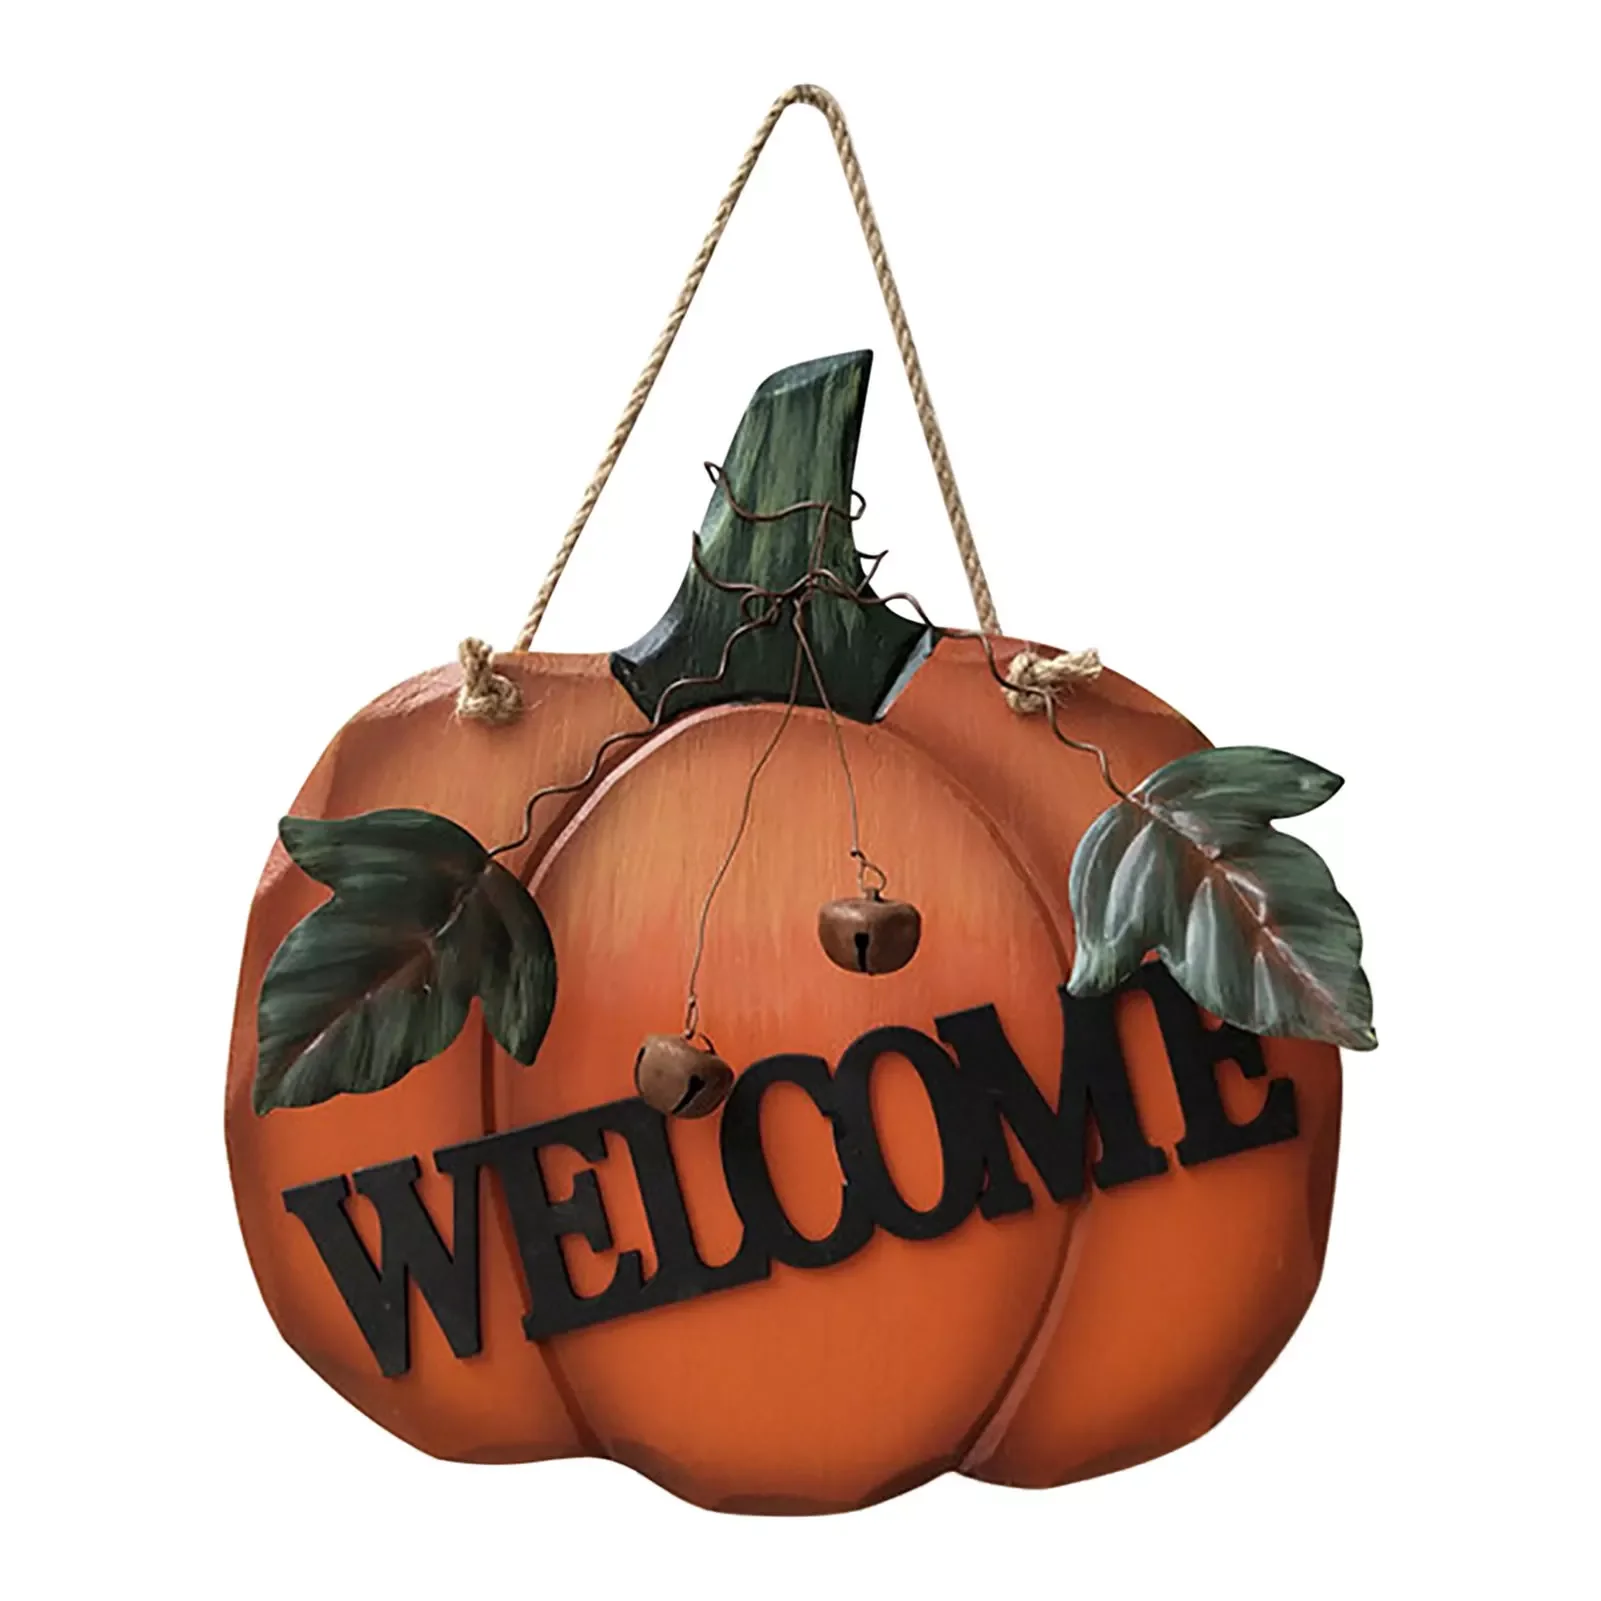 

Halloween Pumpkin Welcome Sign Creativity Rustic Wooden Material Door Hanging Decoration Safe And Non-noxious Sturdy And Durable